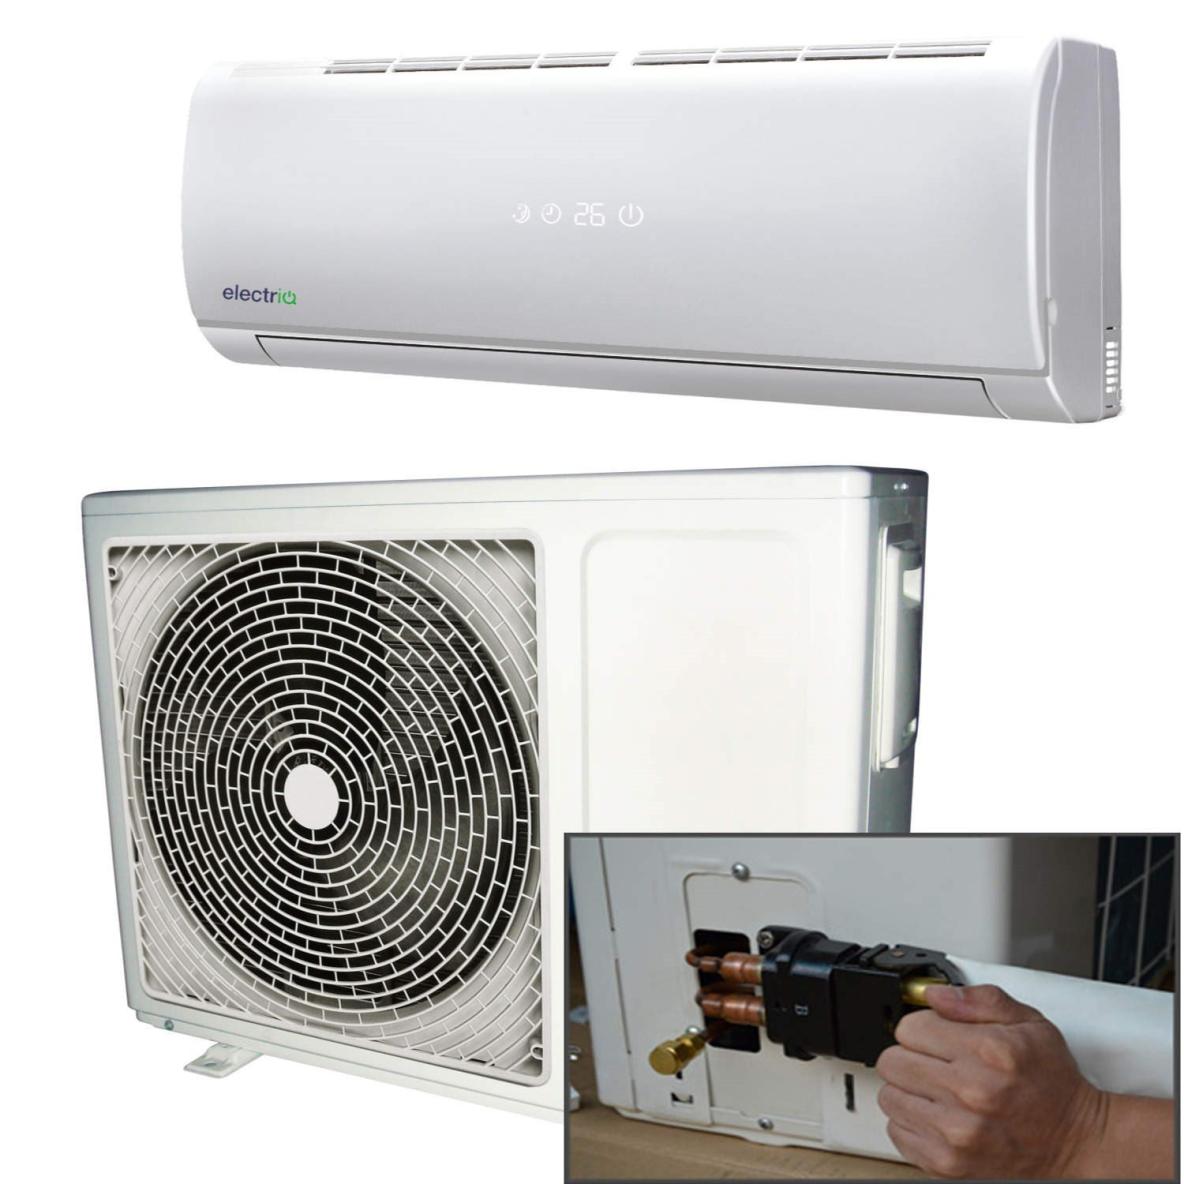 What Are The Latest Air Conditioner Technologies?